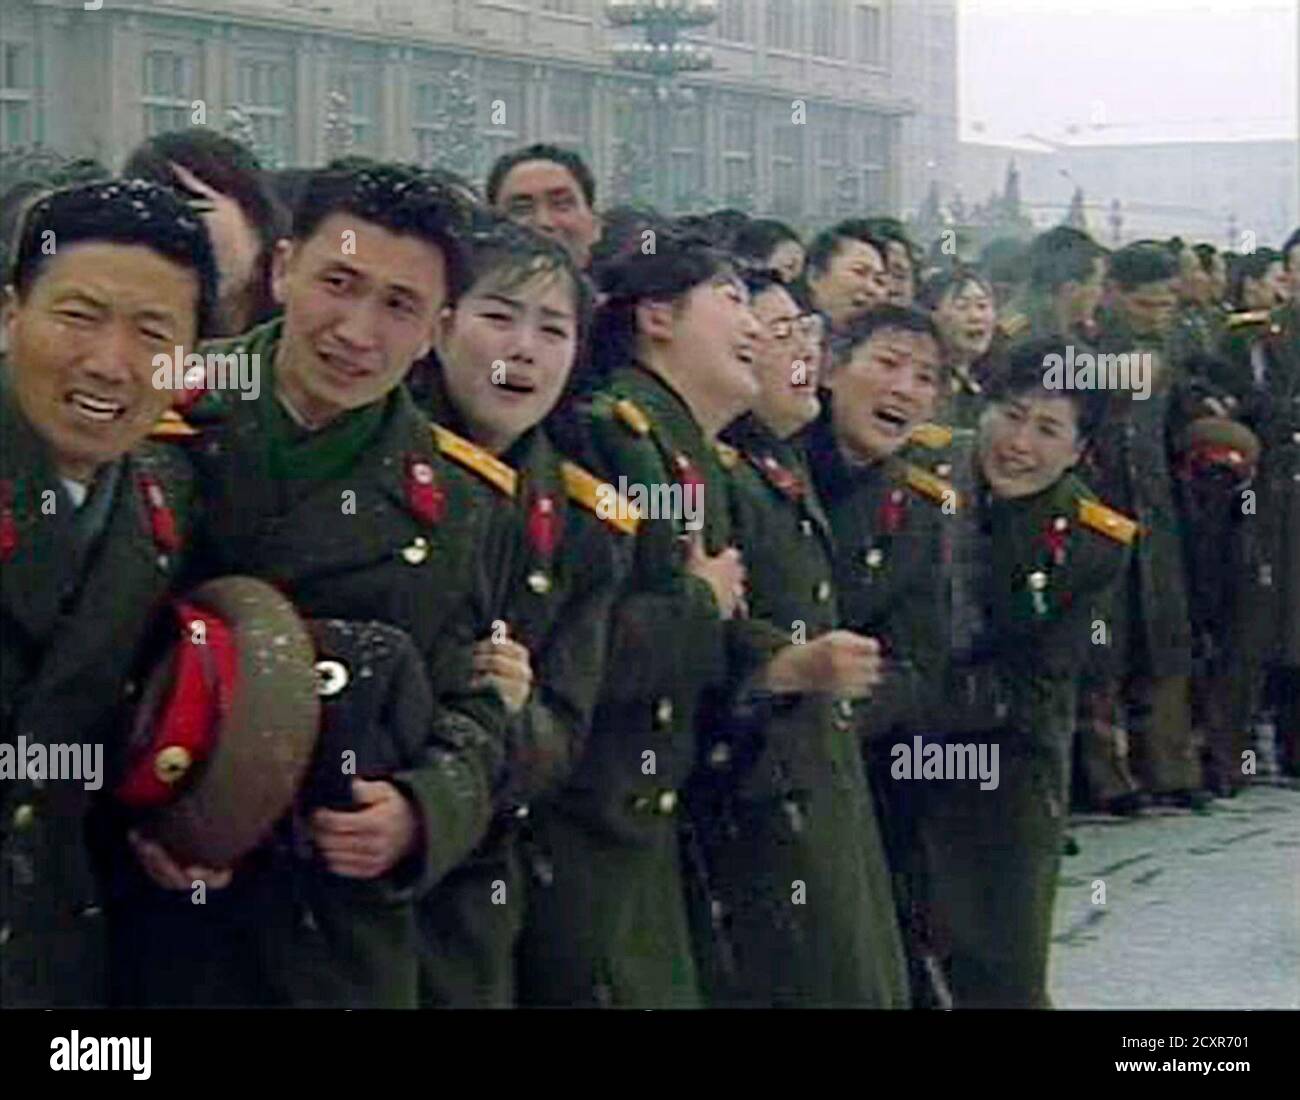 Military personnel react during Kim Jong-il's funeral procession in Pyongyang in this still image taken from video December 28, 2011. North Korea's military staged a huge funeral procession on Wednesday in the snowy streets of the capital Pyongyang for its deceased 'dear leader,' Kim Jong-il, readying a transition to his son, Kim Jong-un.    REUTERS/KRT via Reuters TV     (NORTH KOREA - Tags: POLITICS OBITUARY TPX IMAGES OF THE DAY) Stock Photo